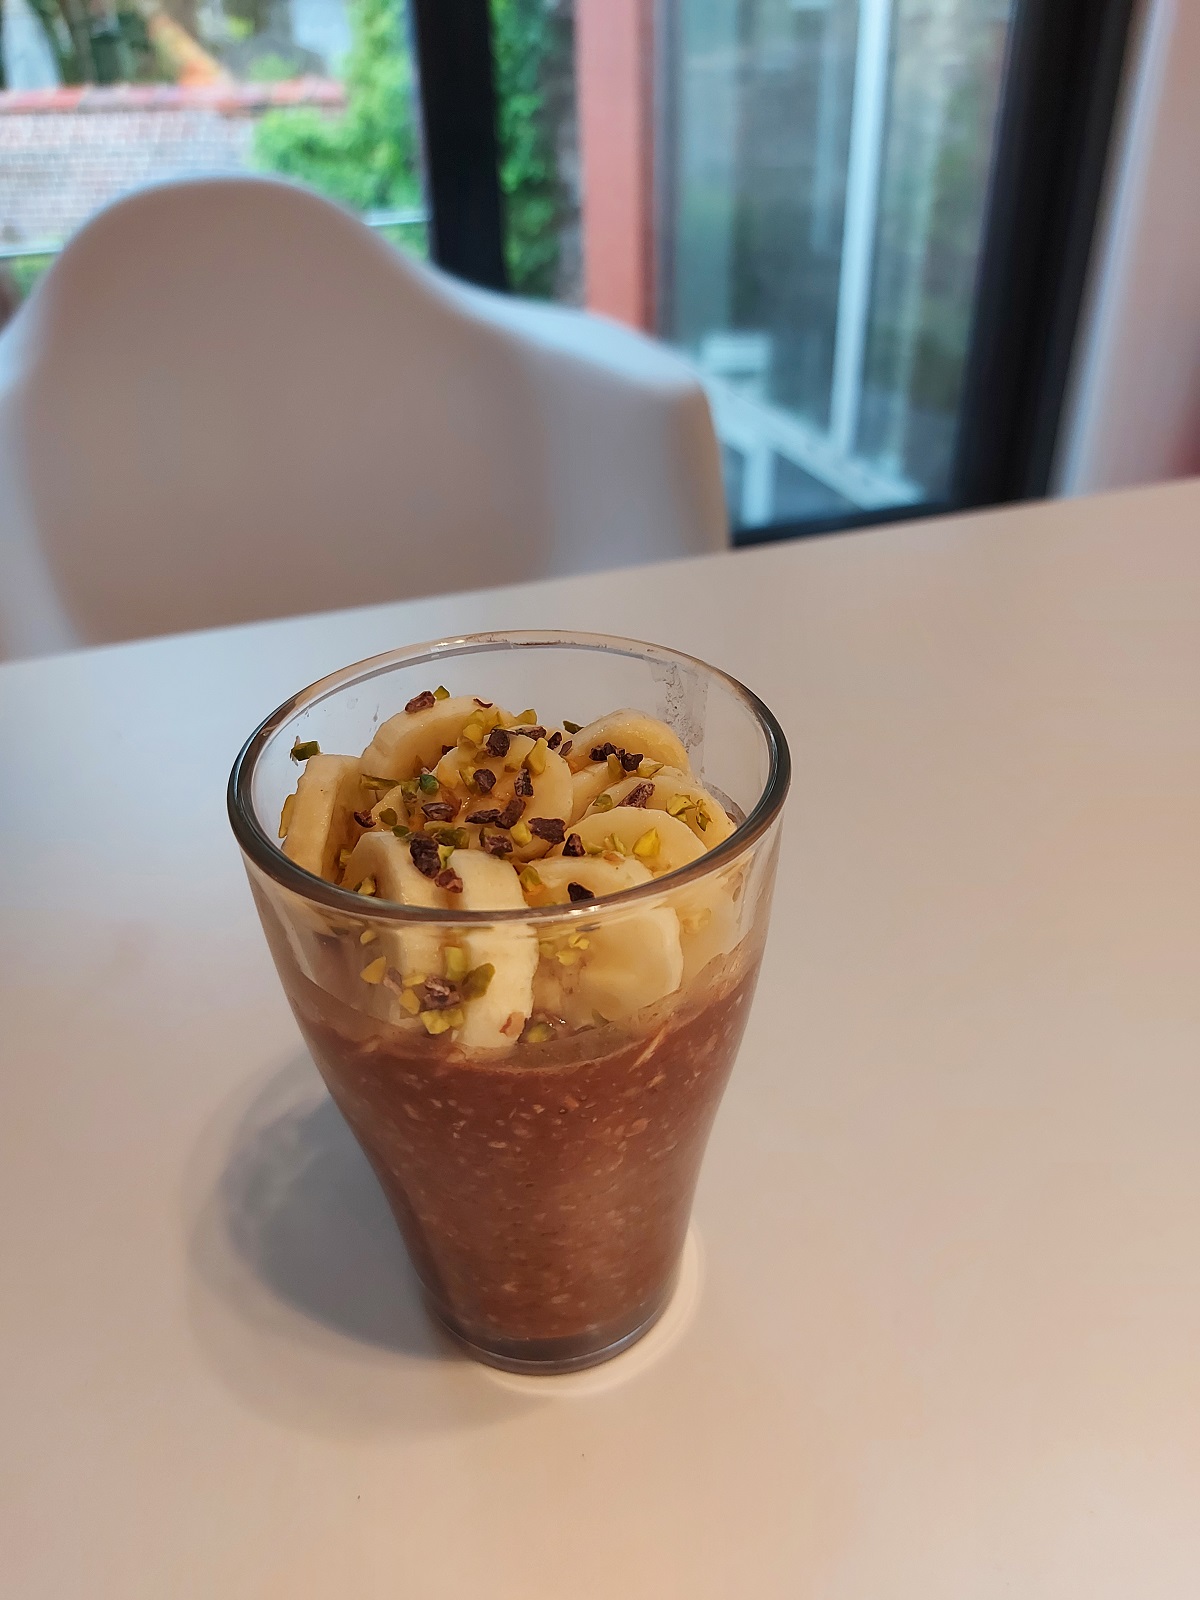 Chocokoffie overnight oats